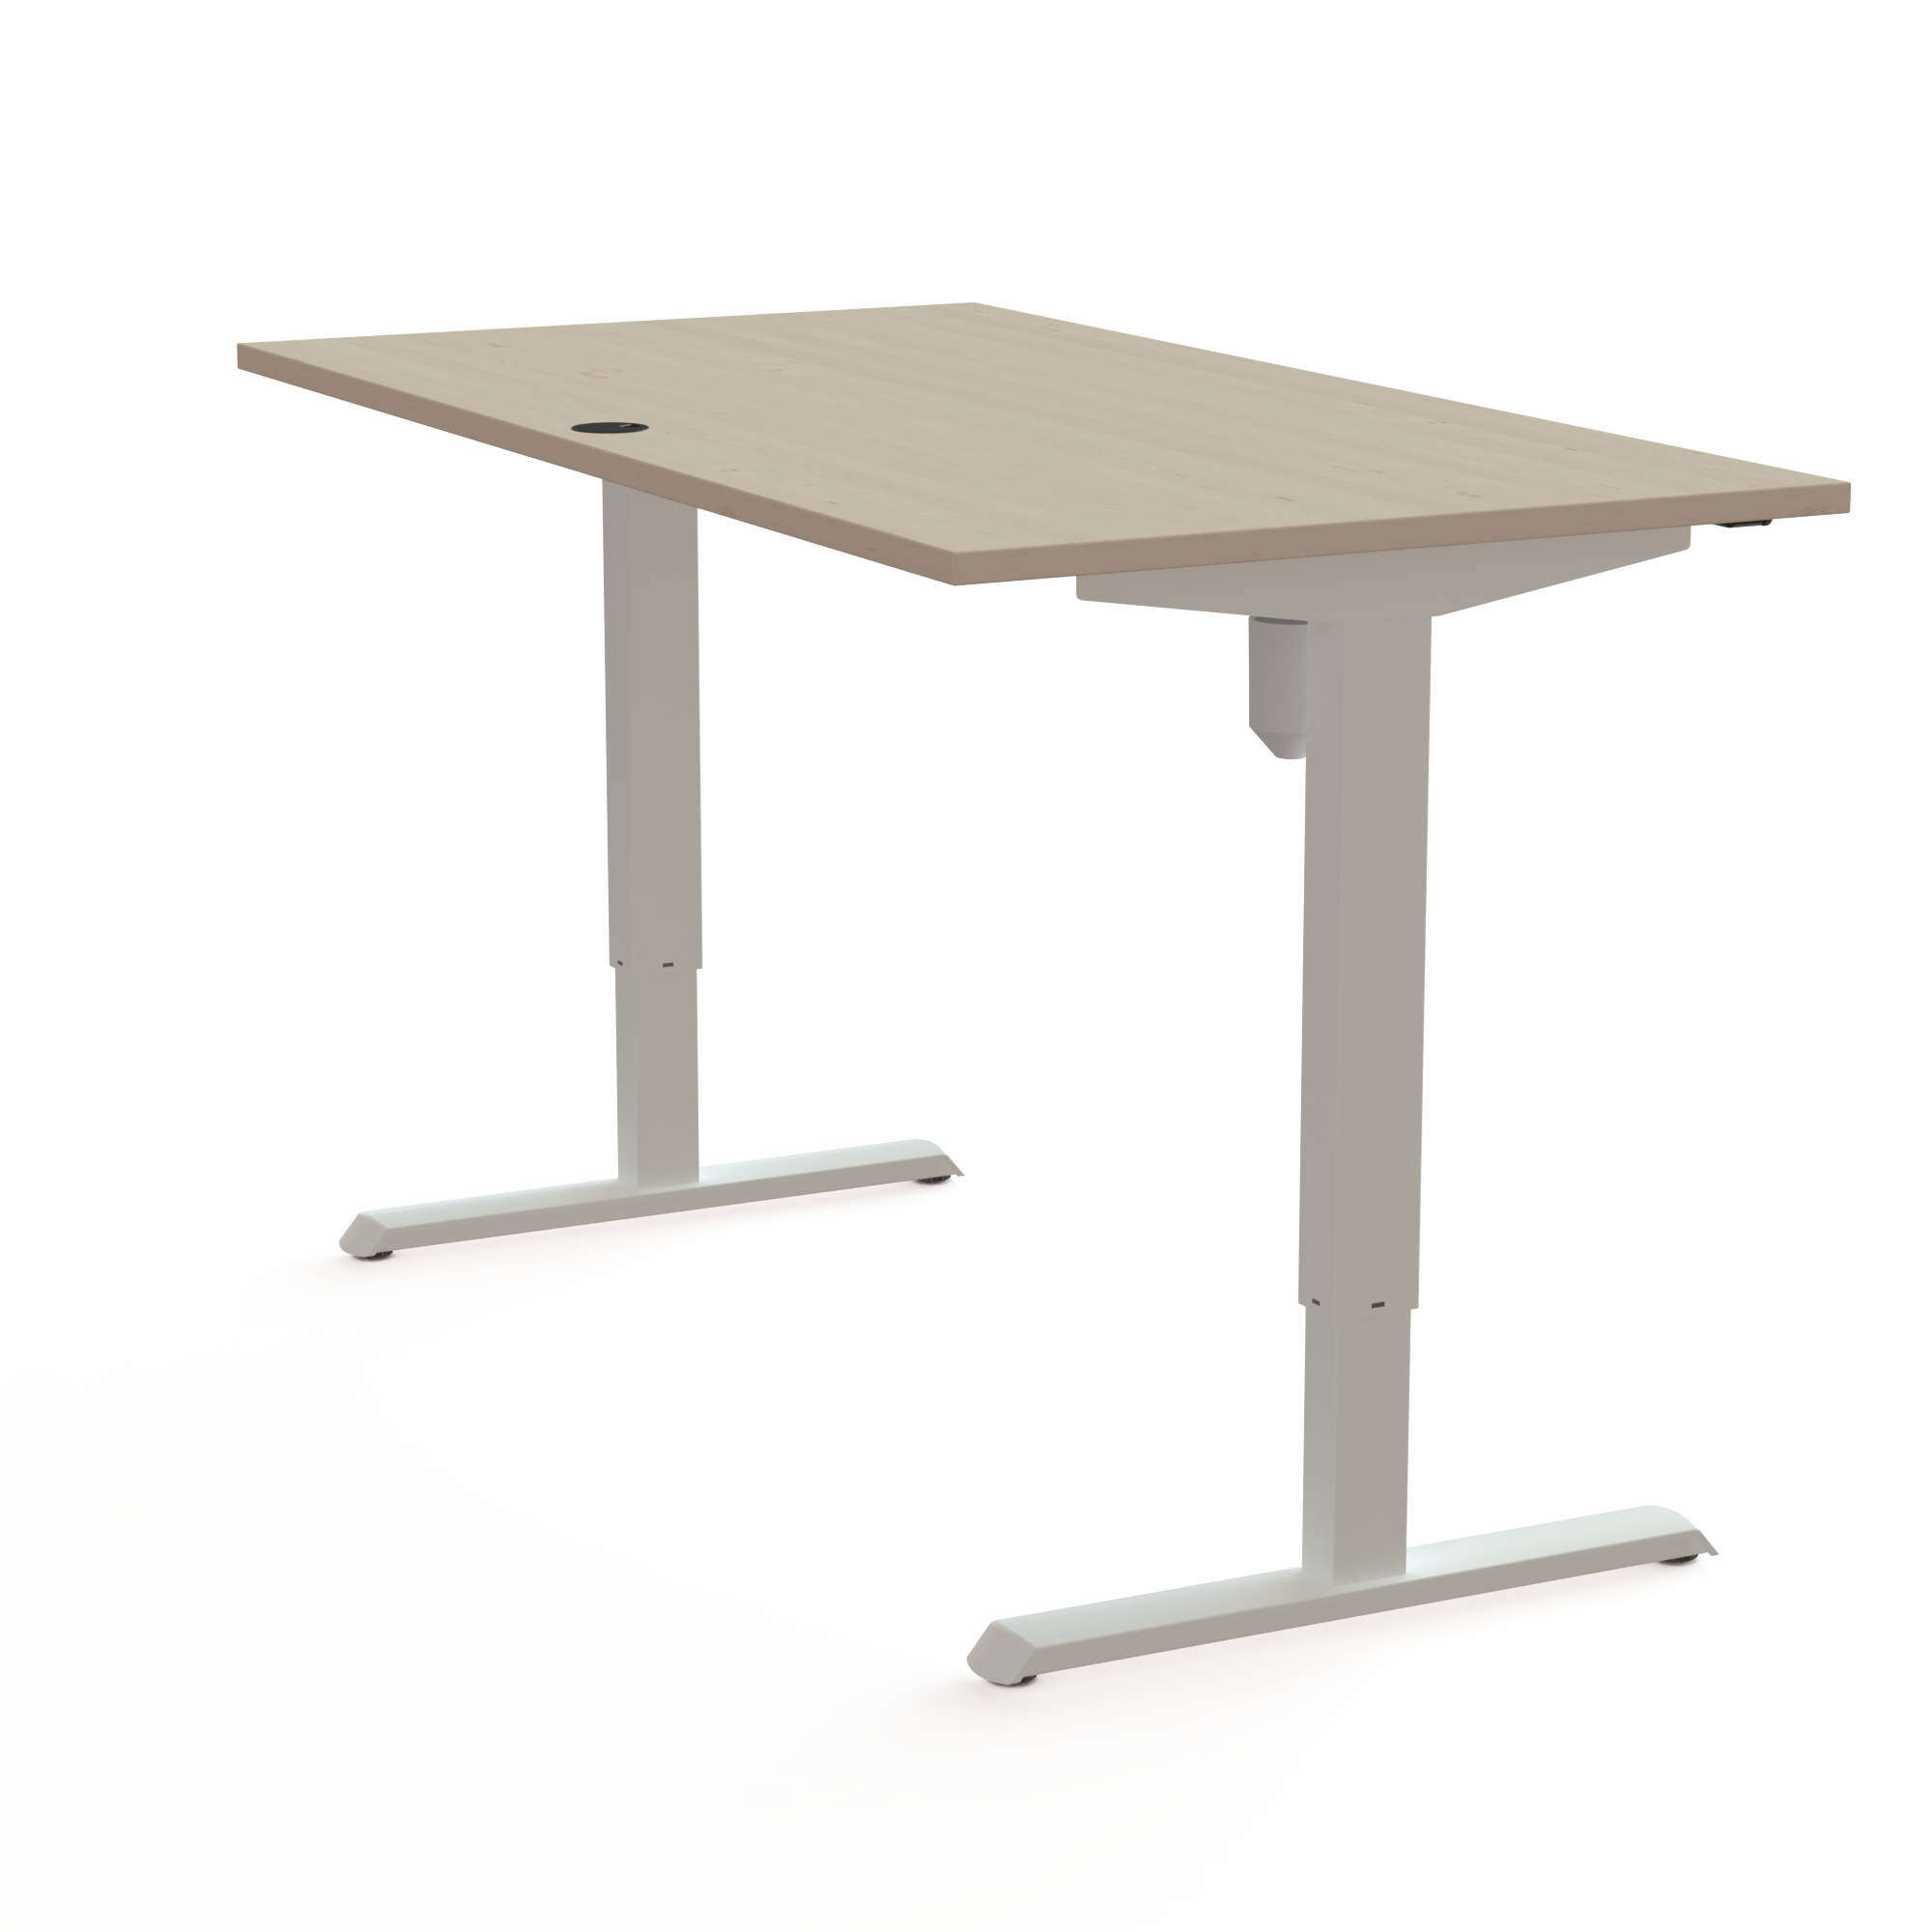 Electric Adjustable Desk | 150x80 cm | Maple with white frame